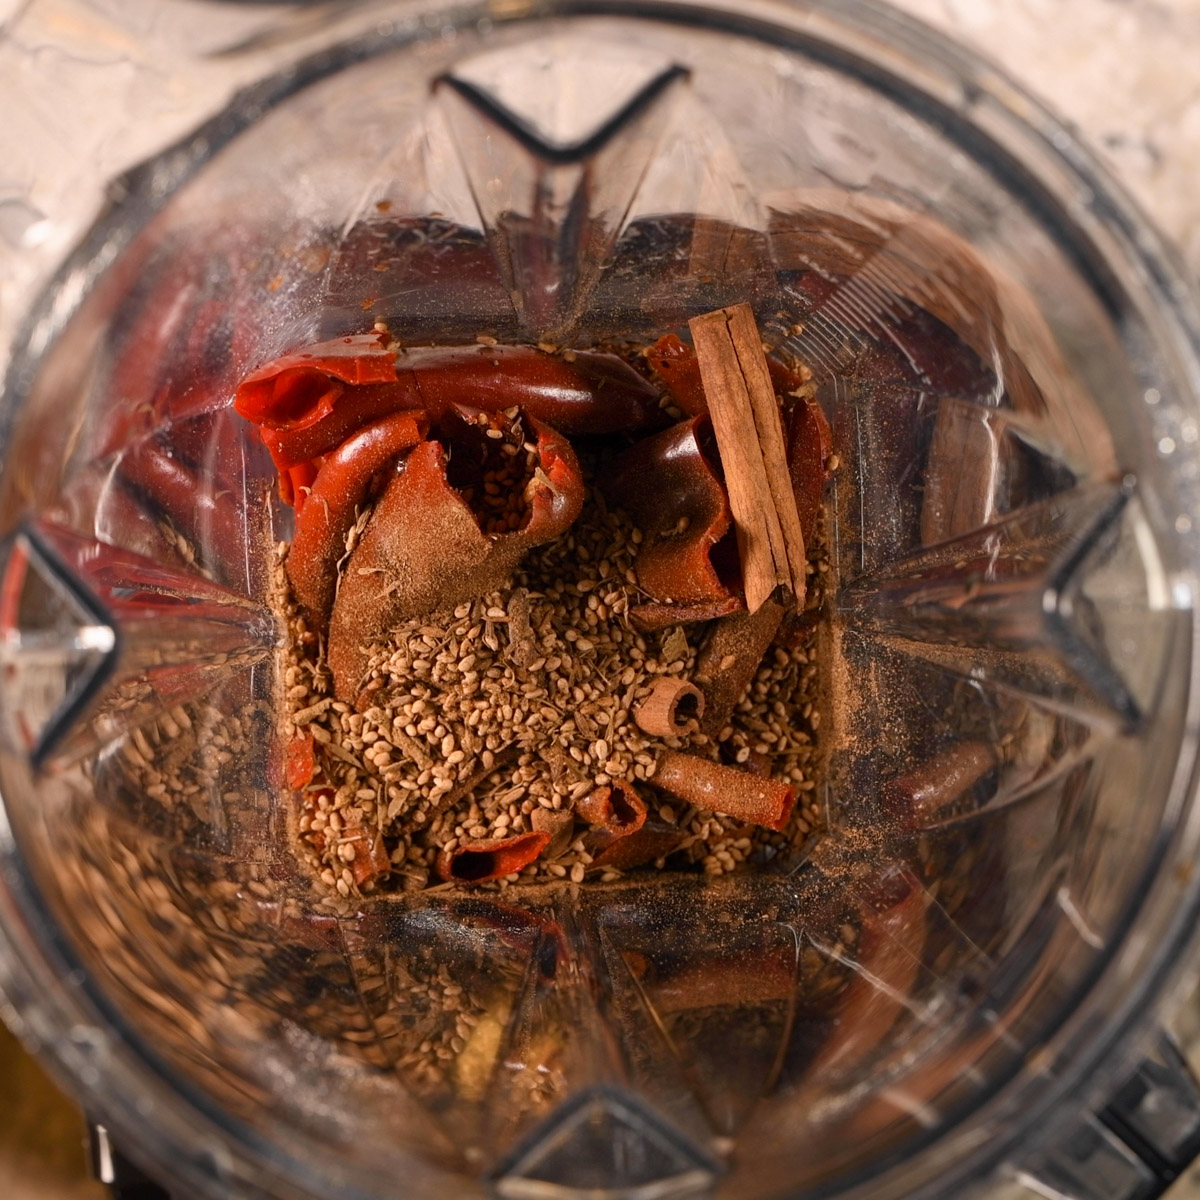 Add the soaked chiles and toasted spices to a blender.